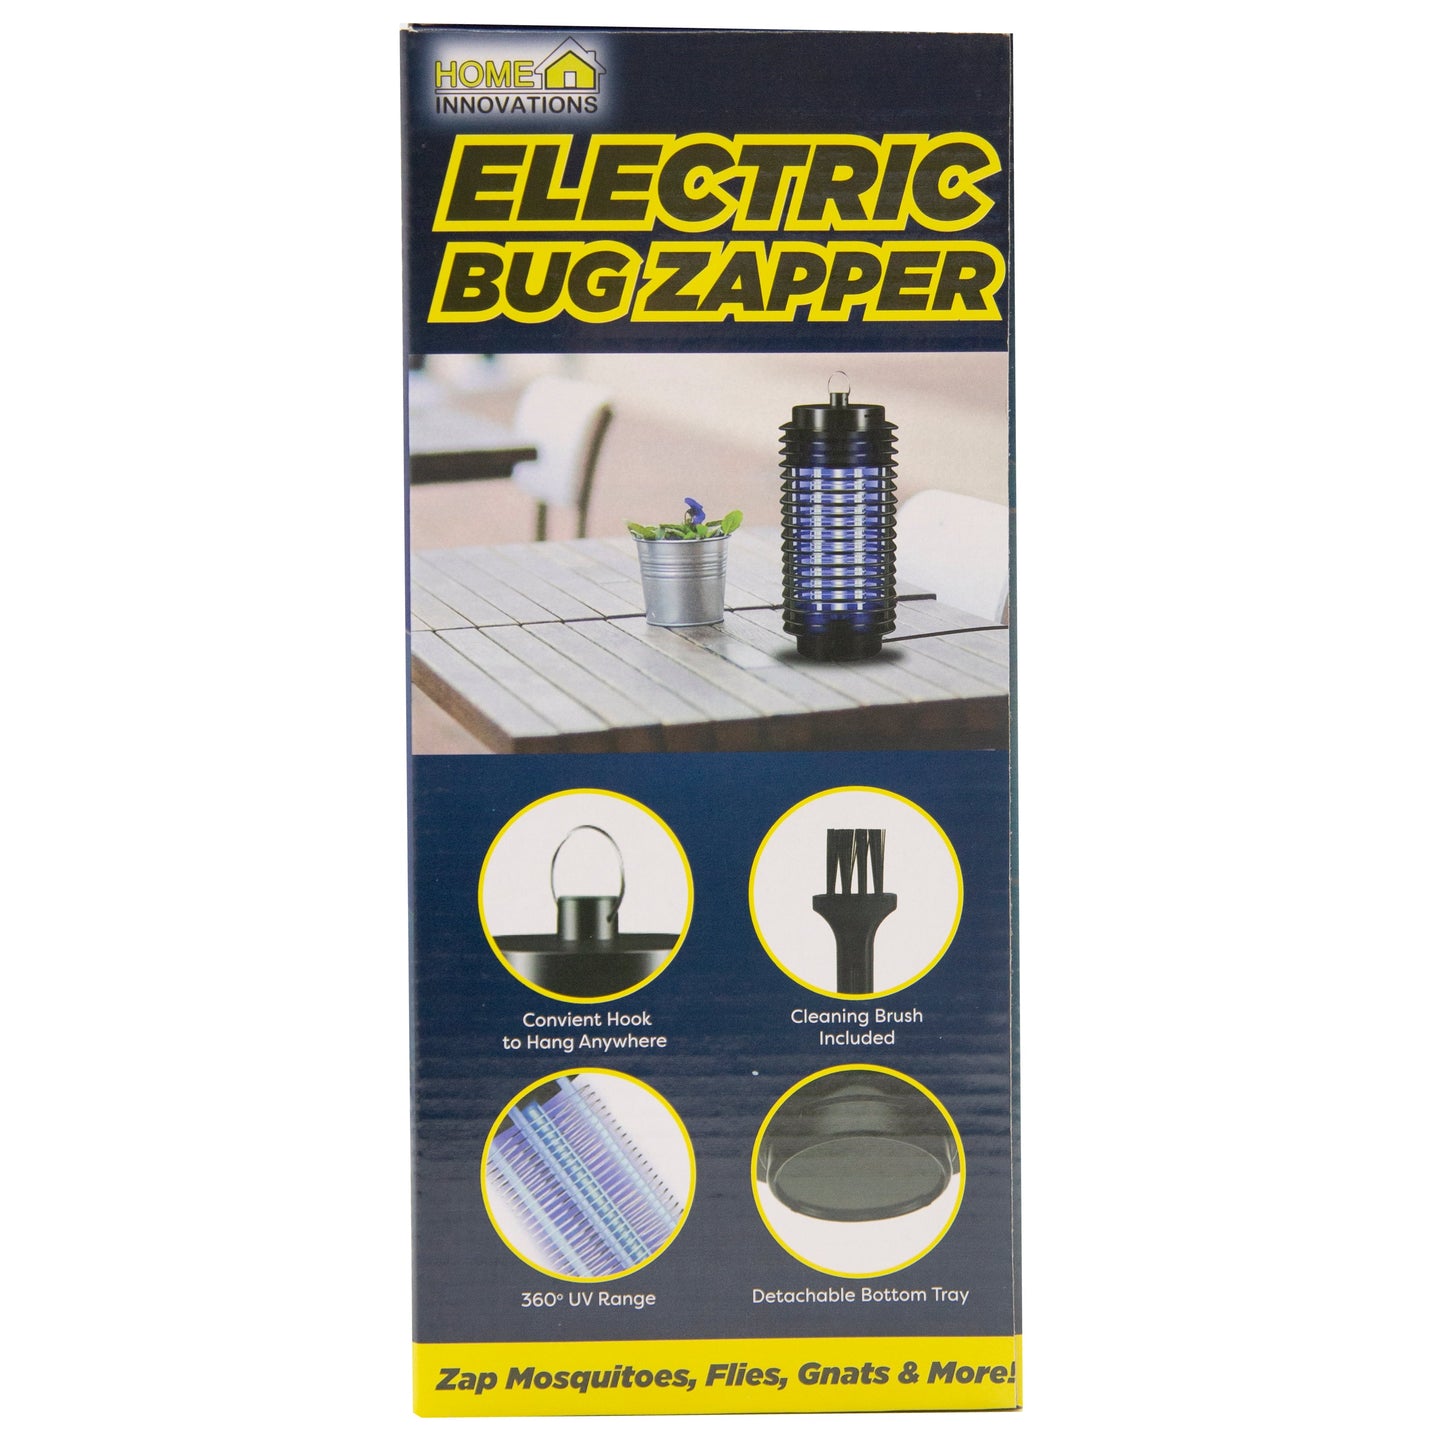 Home Innovations Electronic Bug Zapper - Generation 2